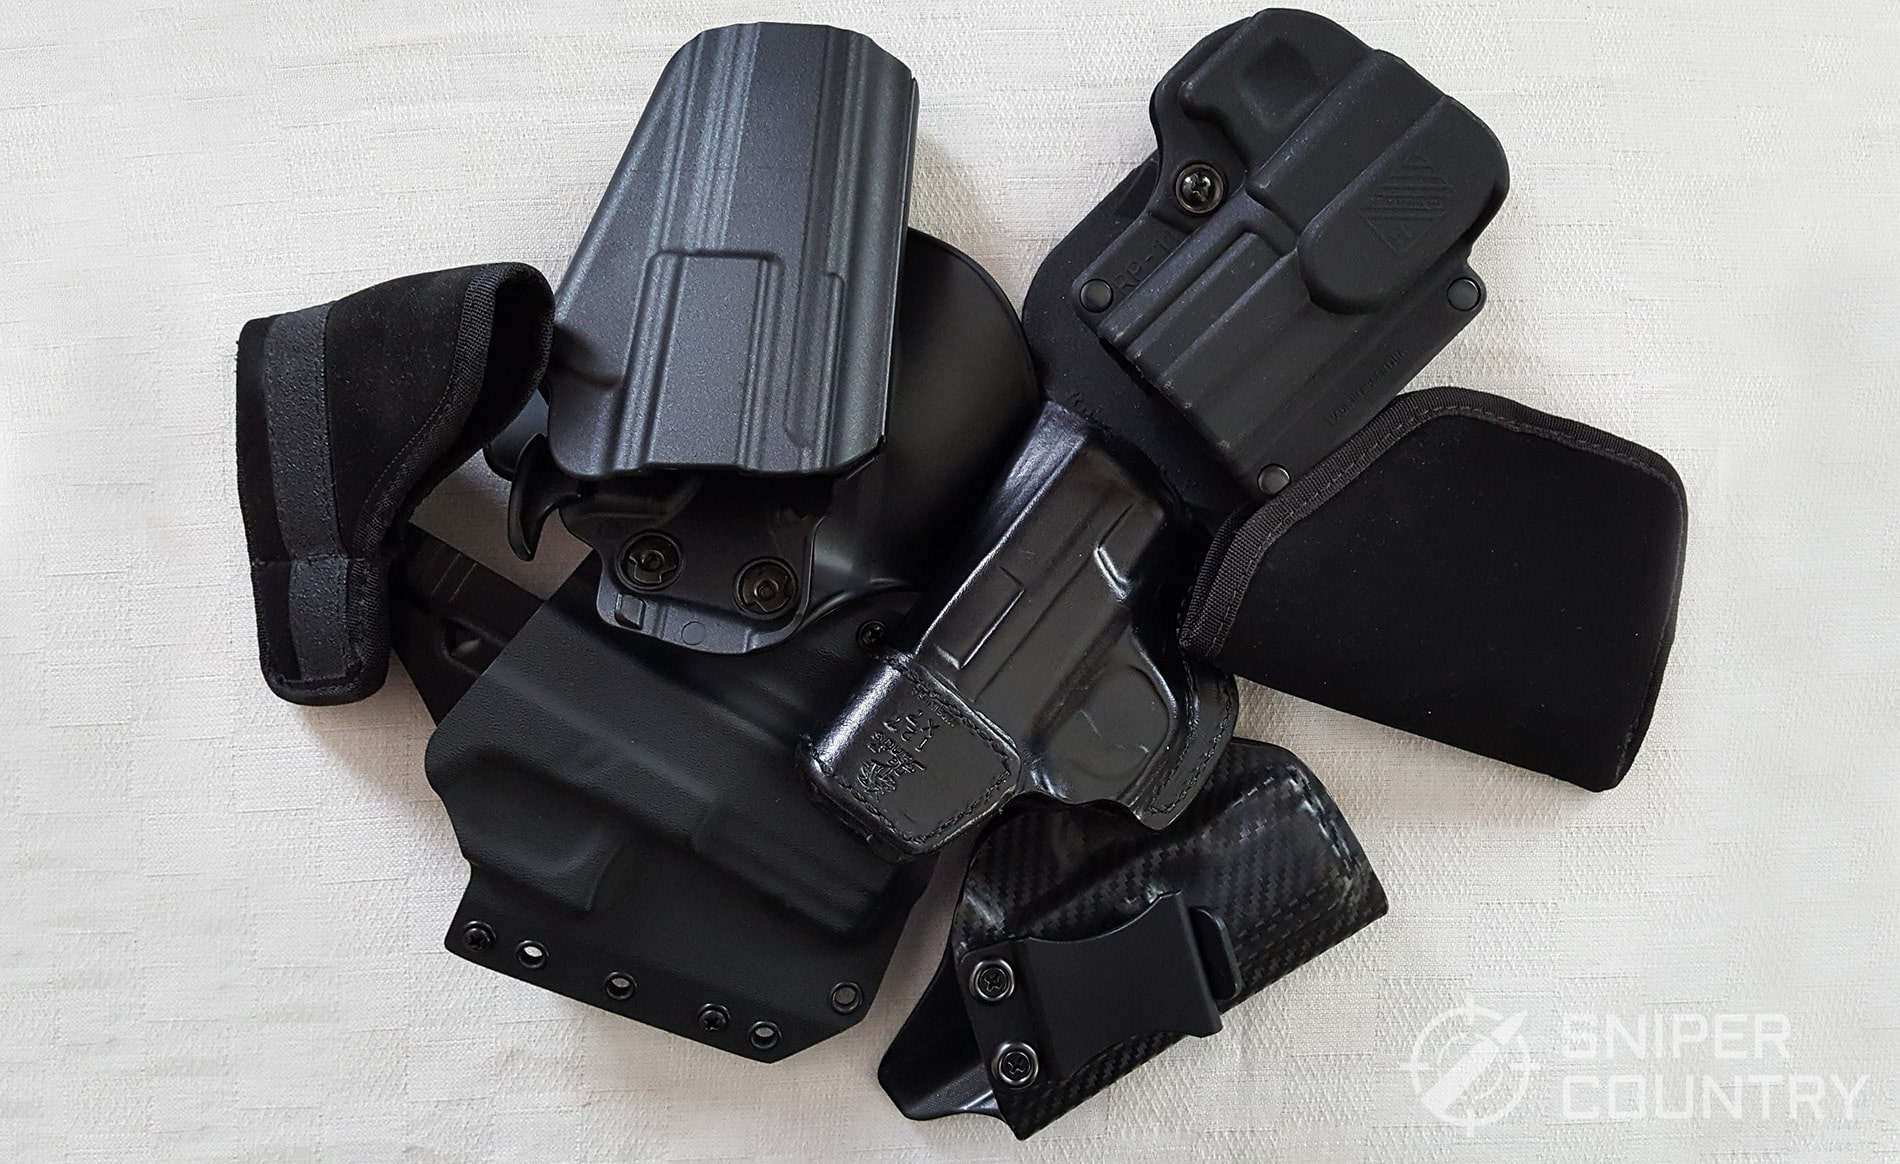 The Ultimate Concealed Carry IWB Nylon Gun Holster For HI POINT 40,45 